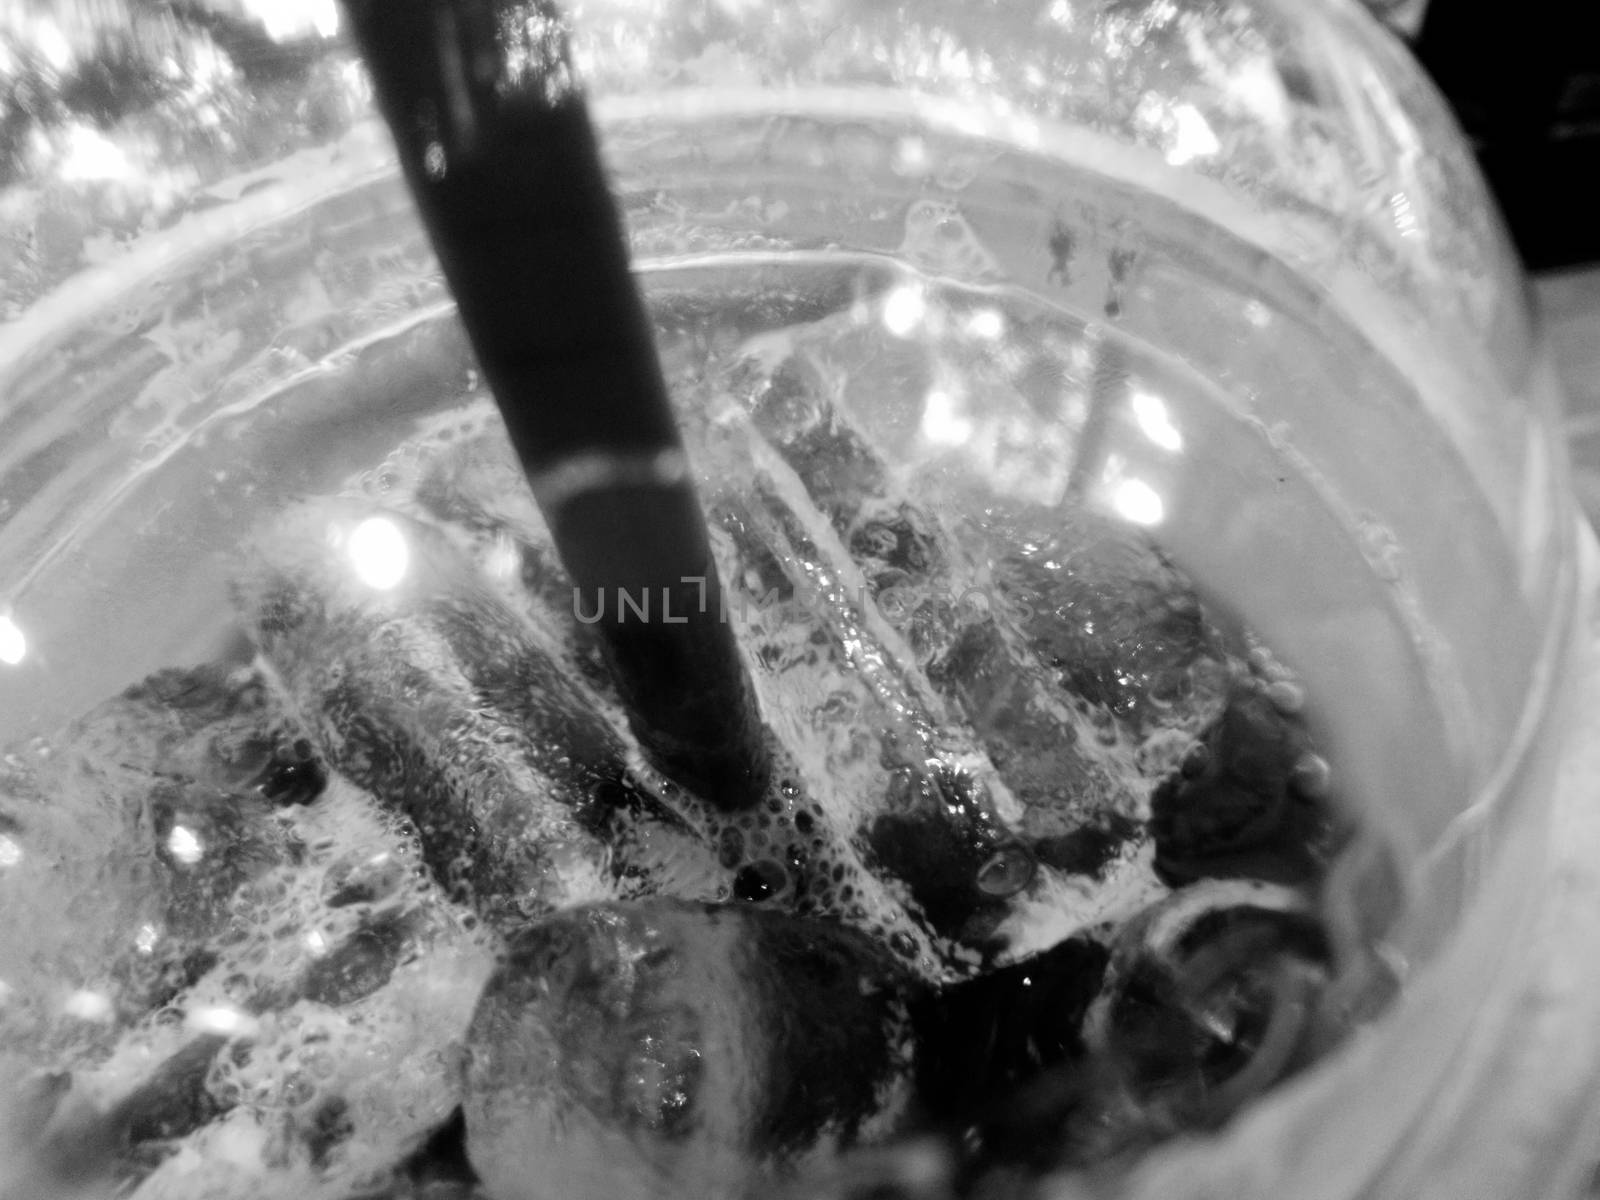 Black Americano iced coffee in black and white